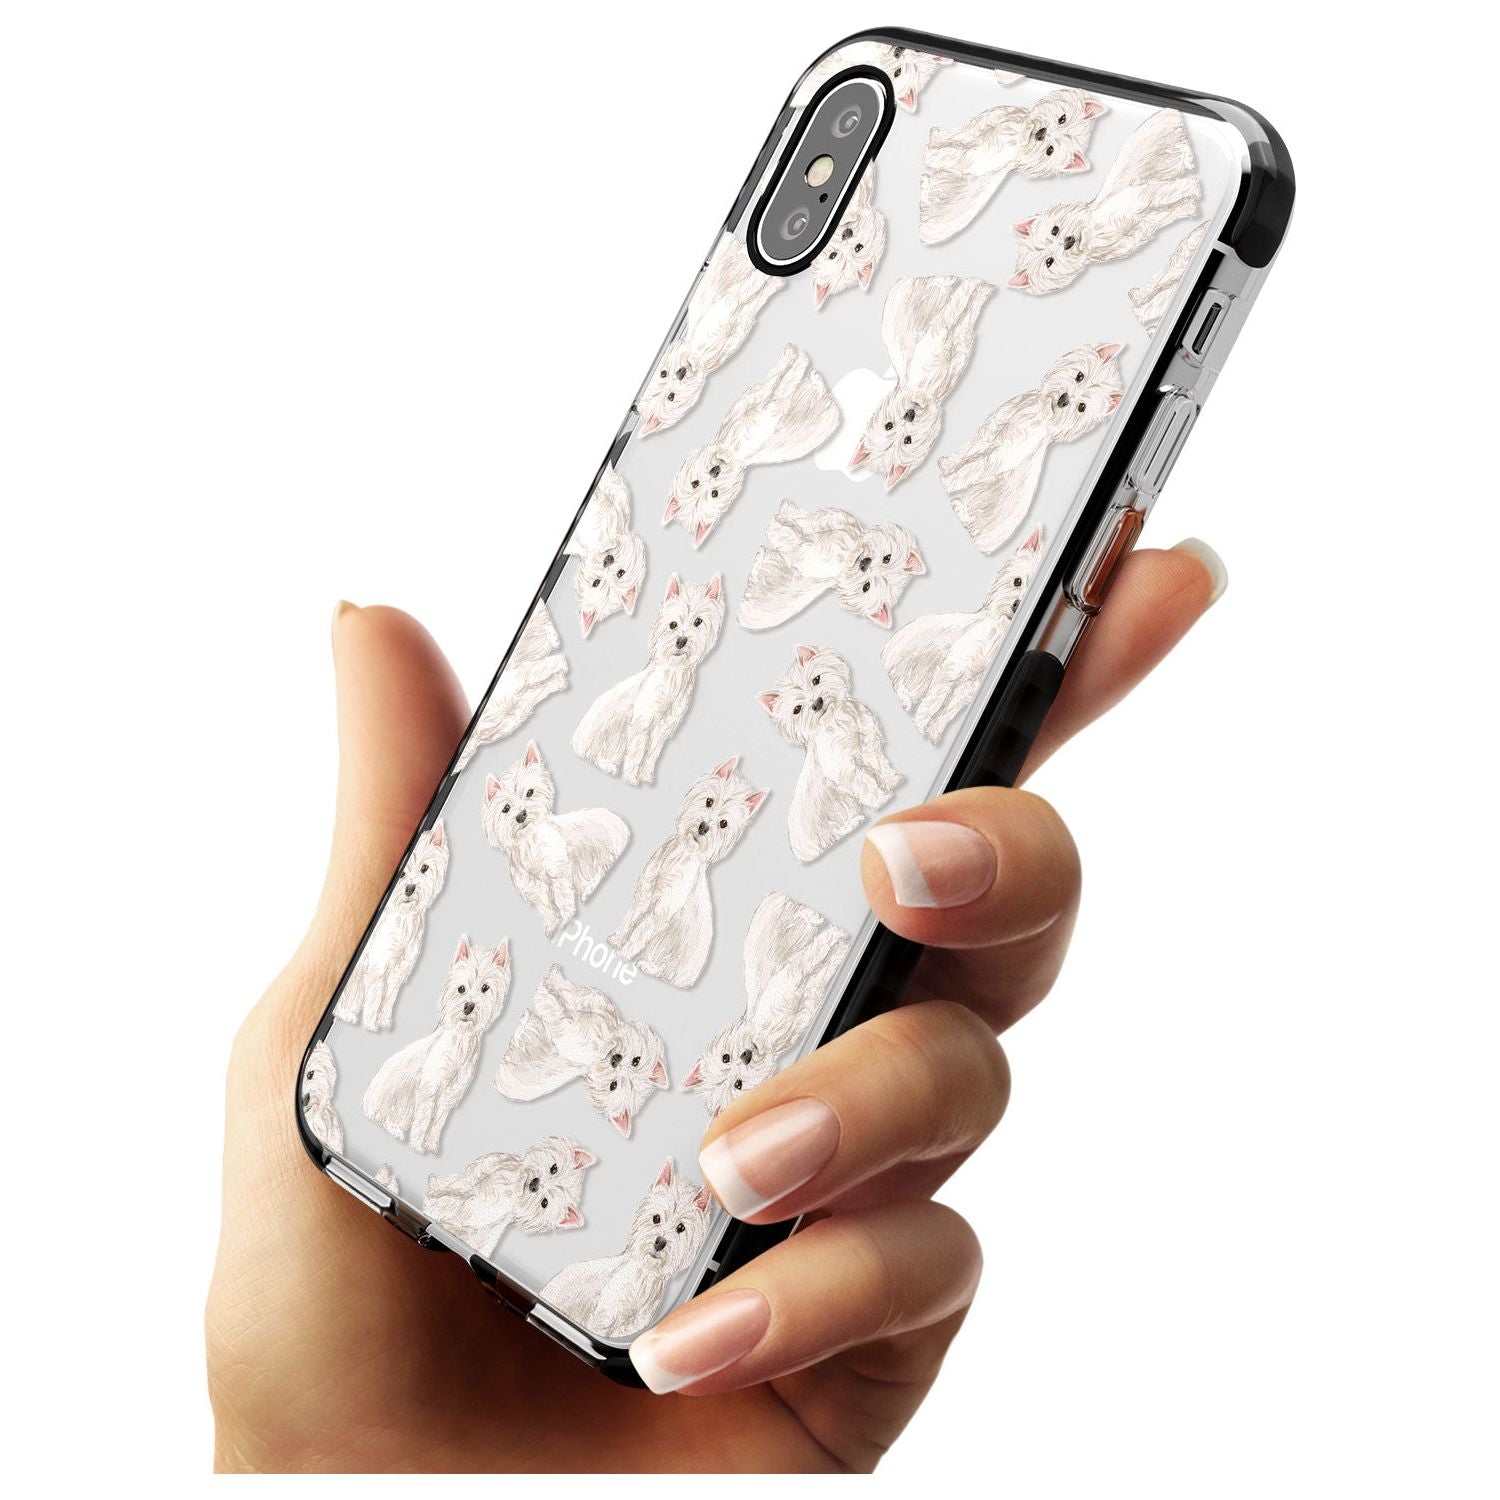 Westie Watercolour Dog Pattern Black Impact Phone Case for iPhone X XS Max XR